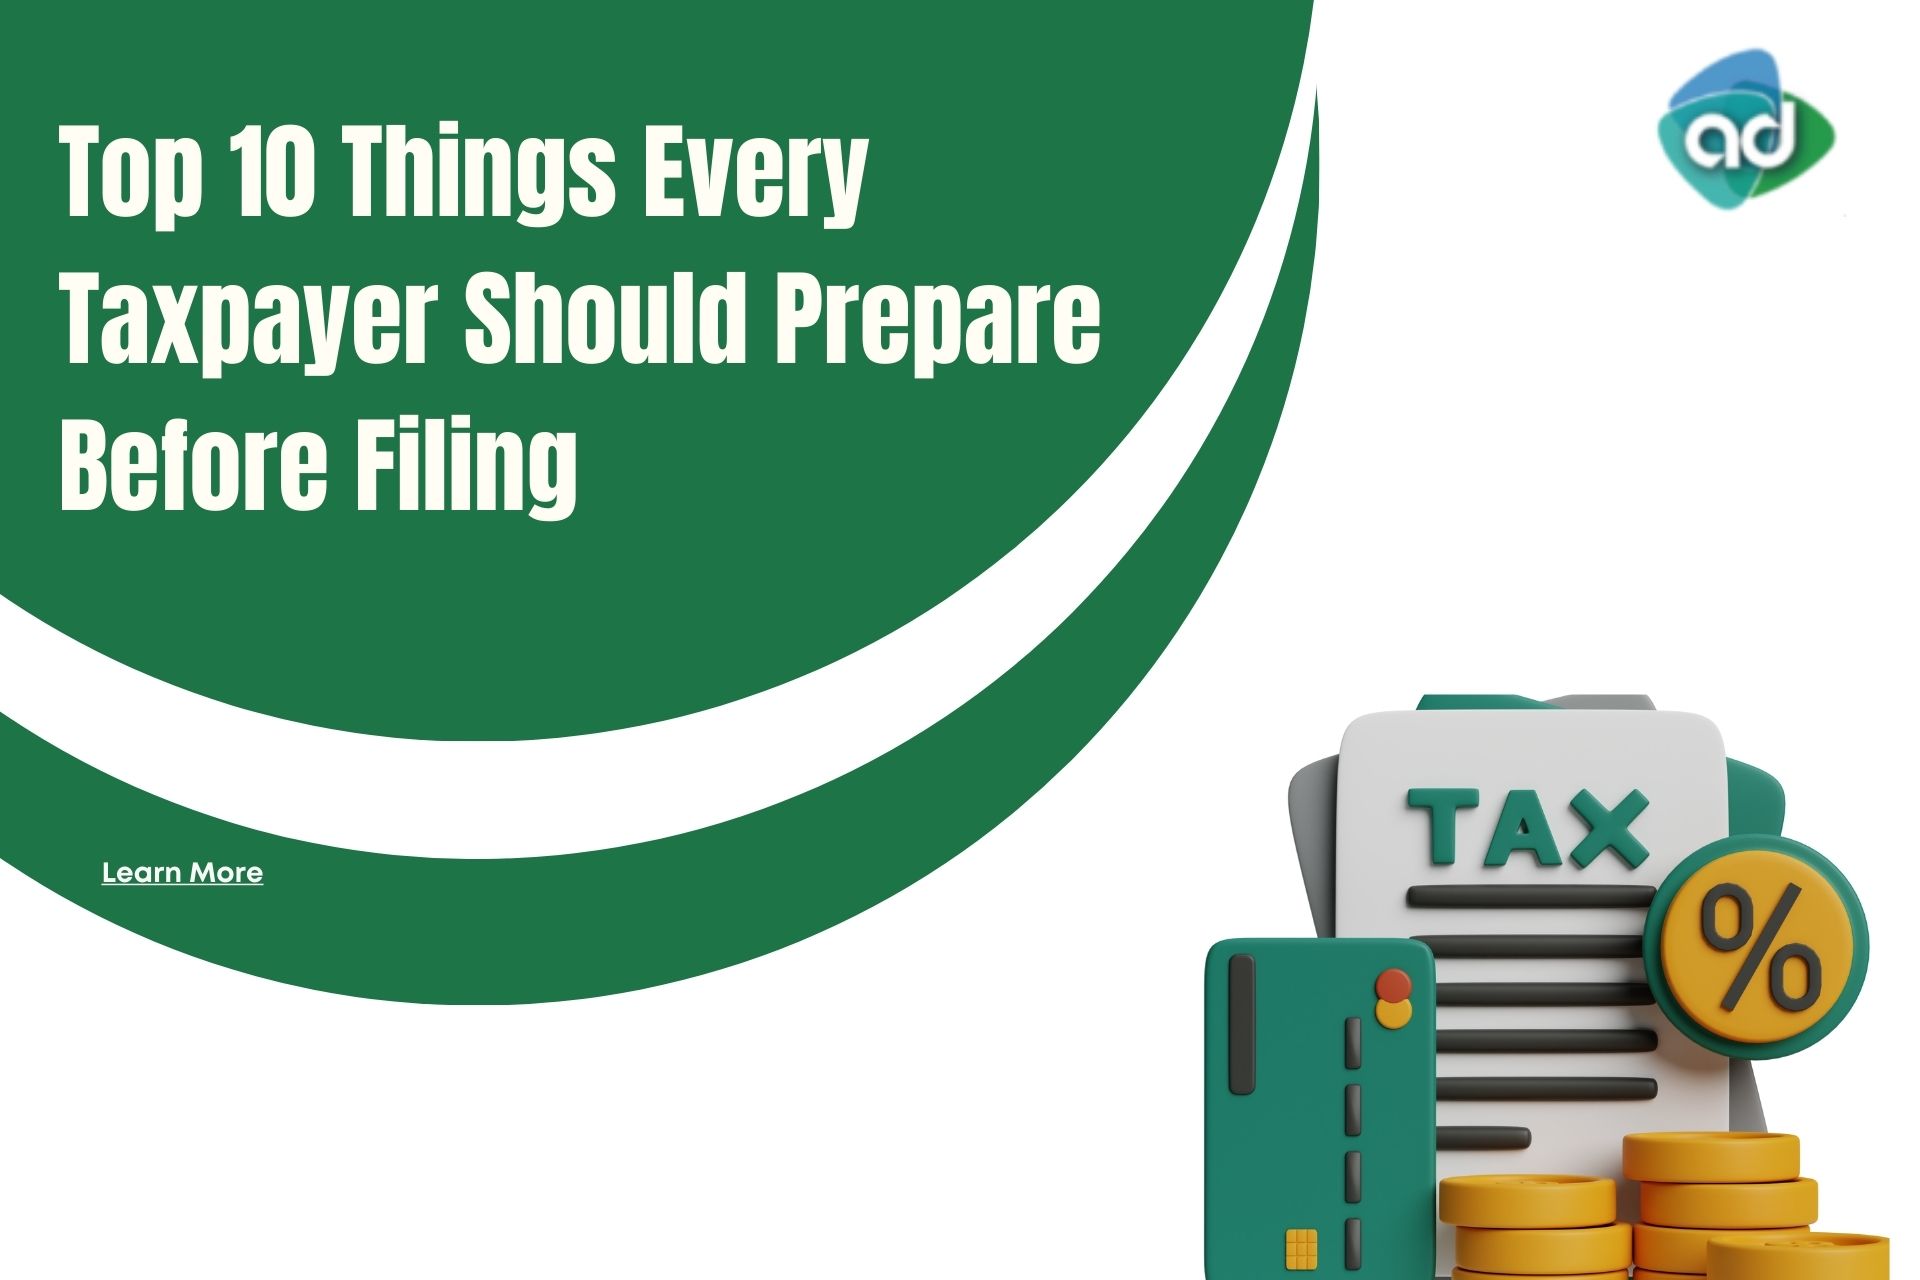 Top 10 Things Every Taxpayer Should Prepare Before Filing